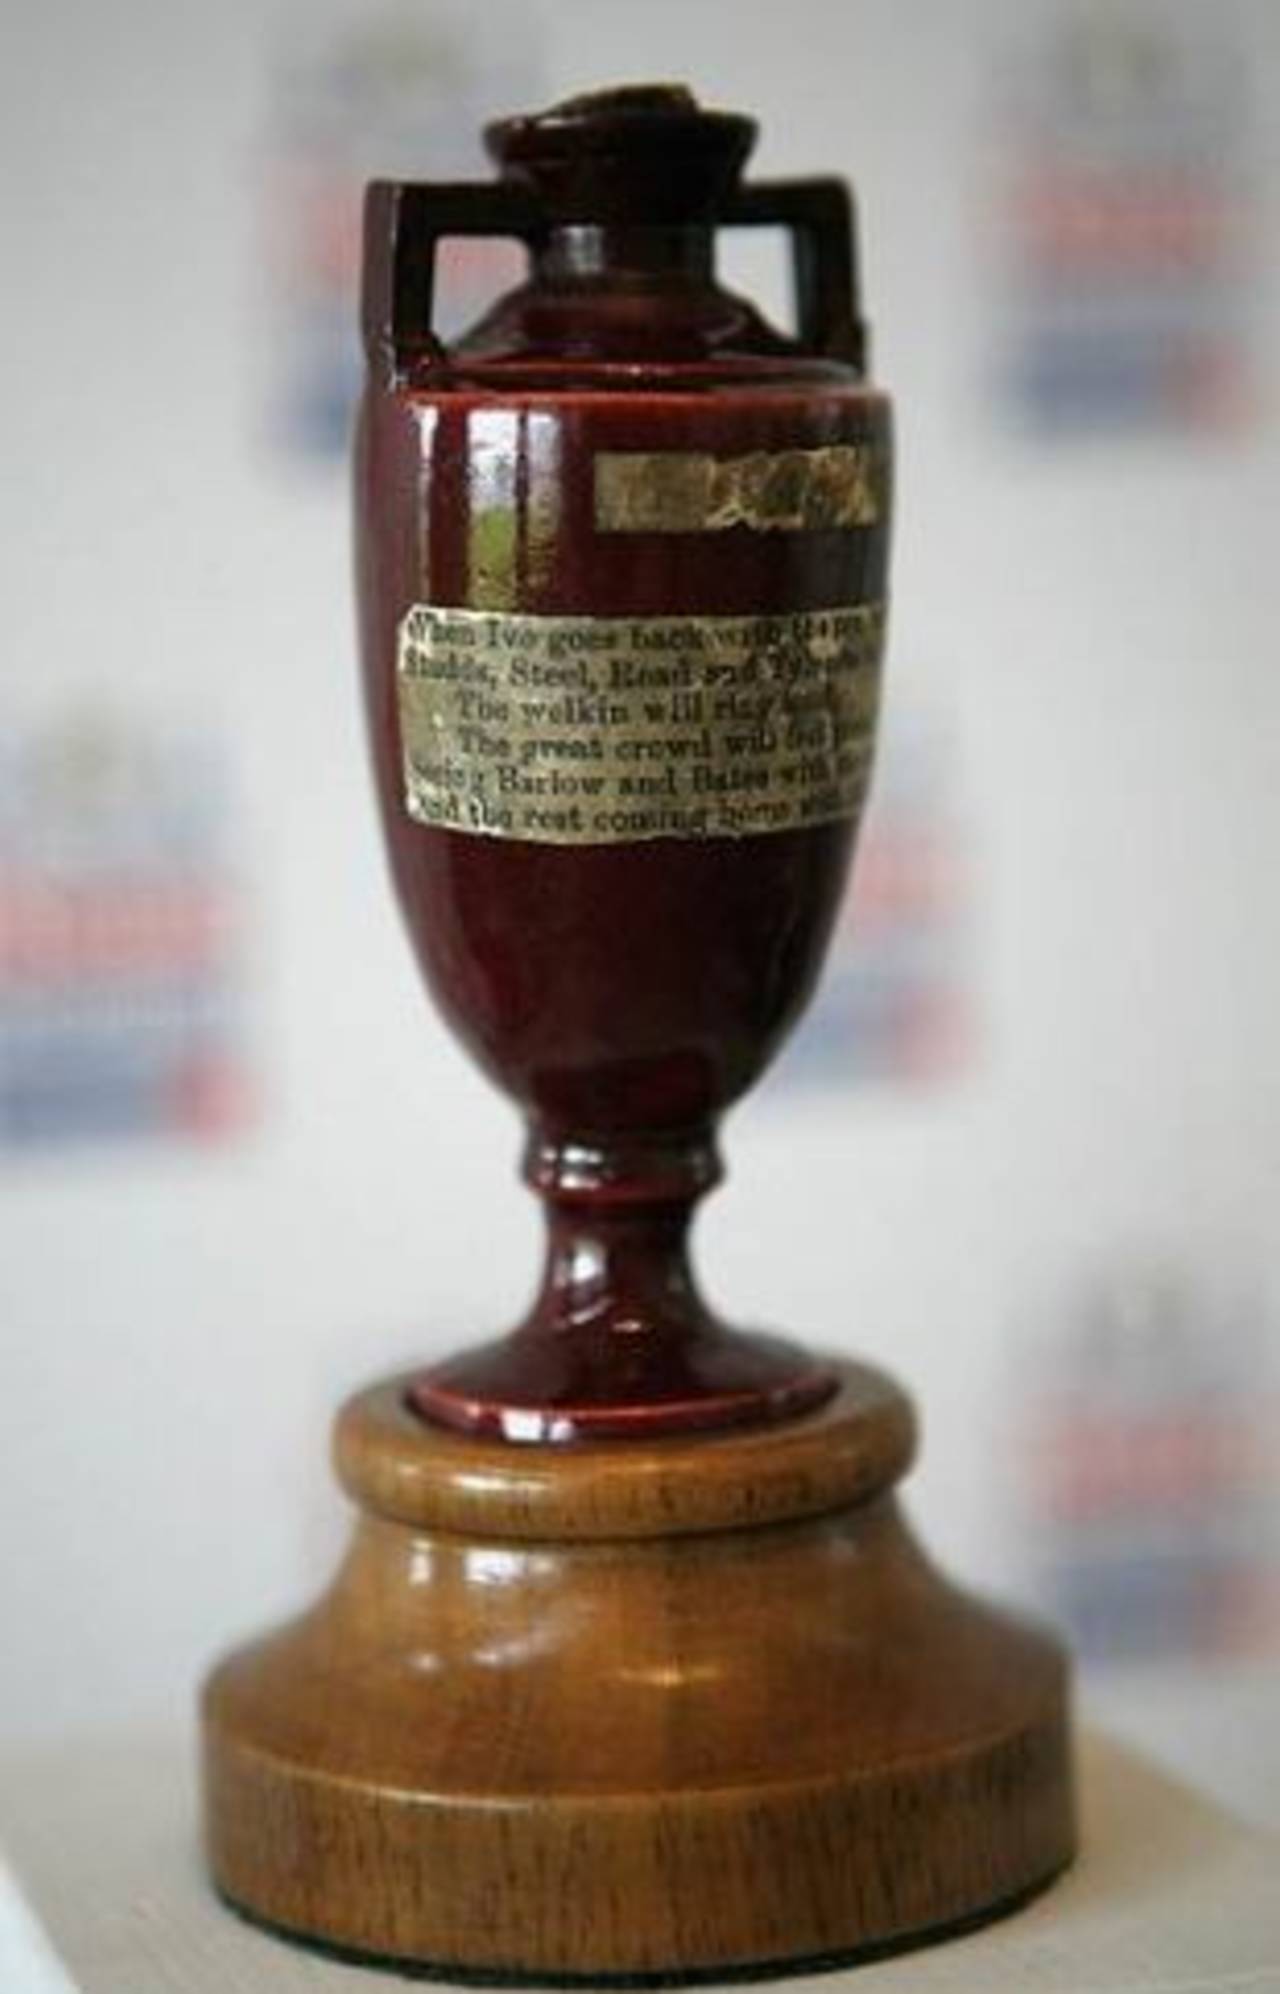 The original Ashes urn displayed at Lord's, London, October 9, 2006